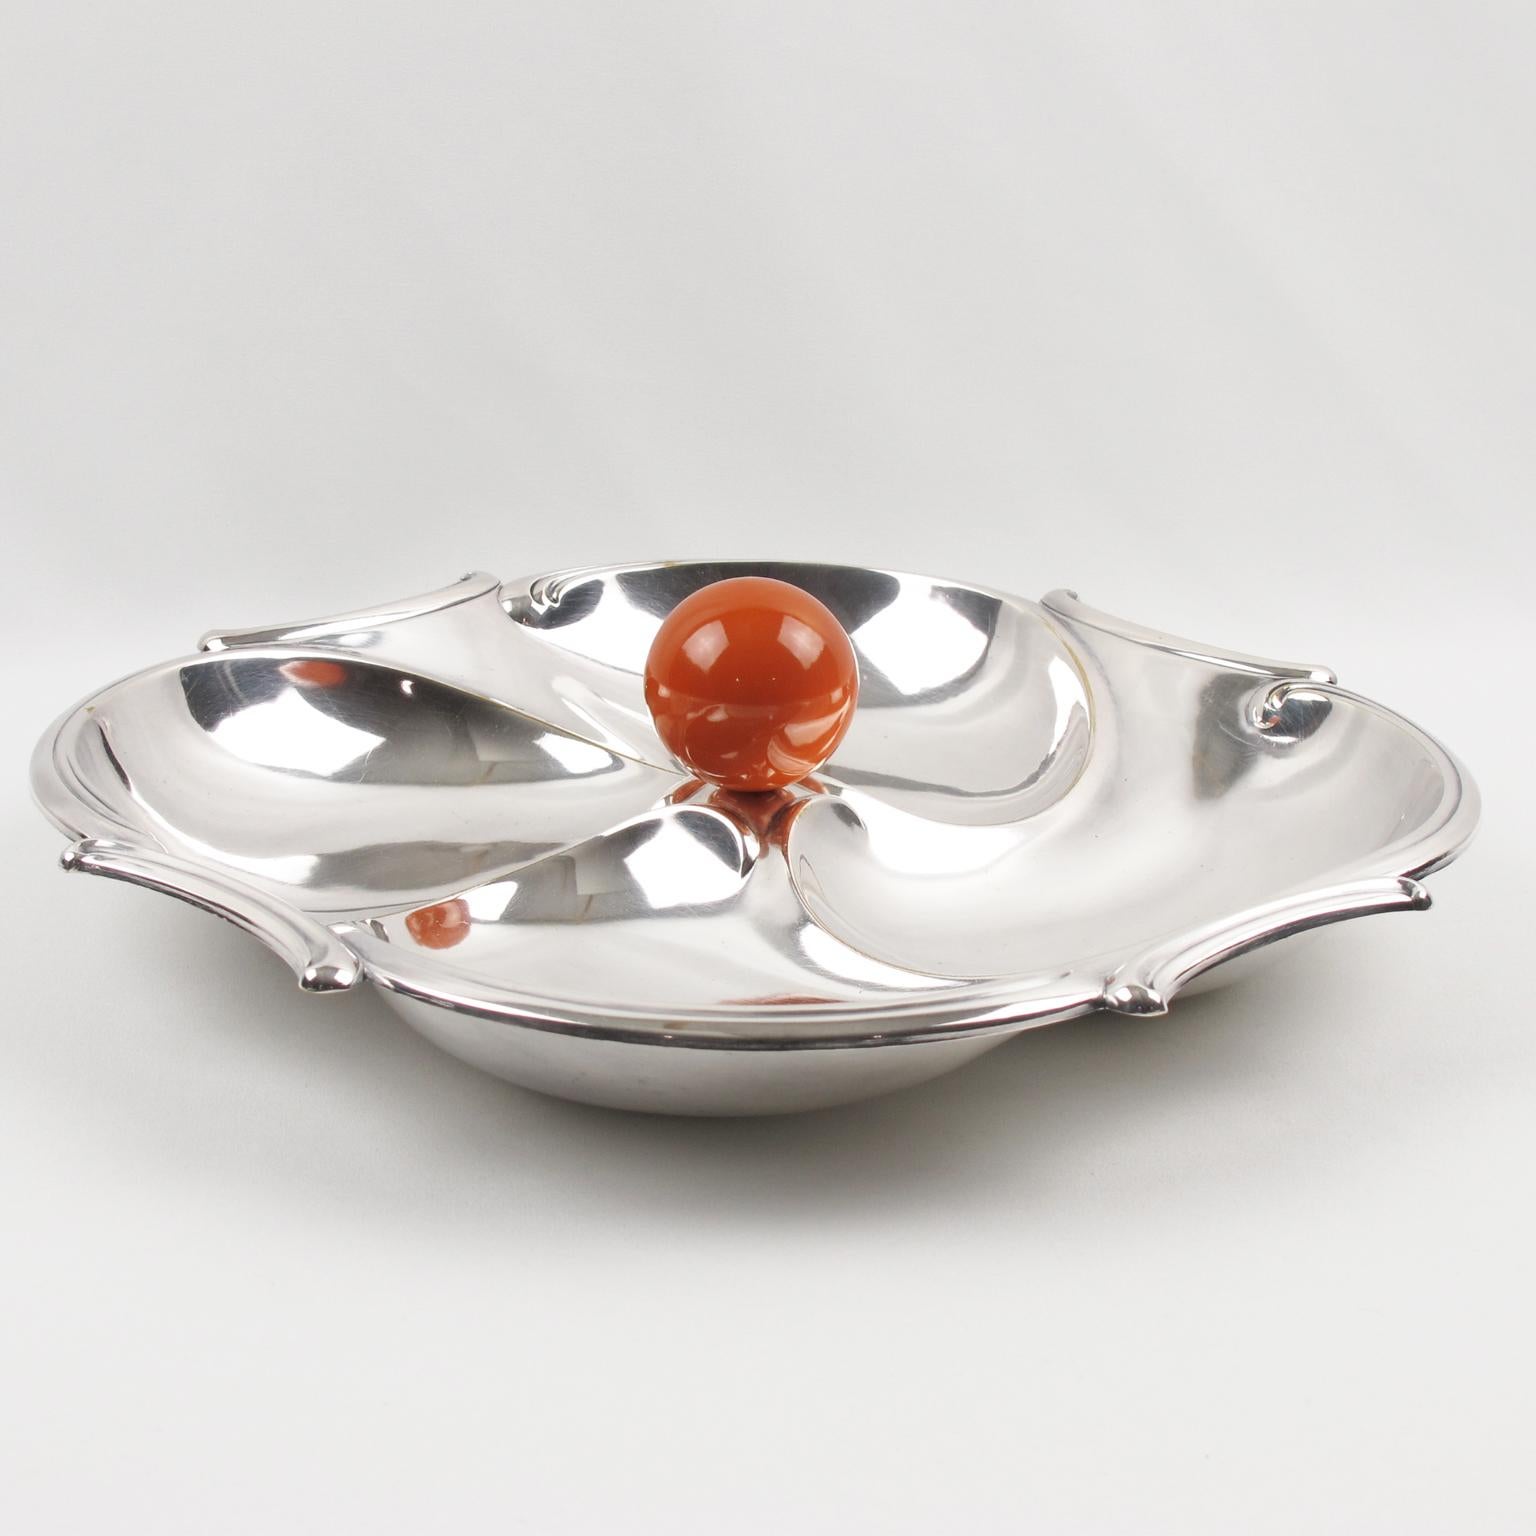 French Art Deco barware serving set for hors d'oeuvres, cocktail, snack, or appetizers by silversmith Maison Bezou, Paris. Features a large dimensional rounded polished silver plate serving tray with four compartments and an orange Bakelite ball